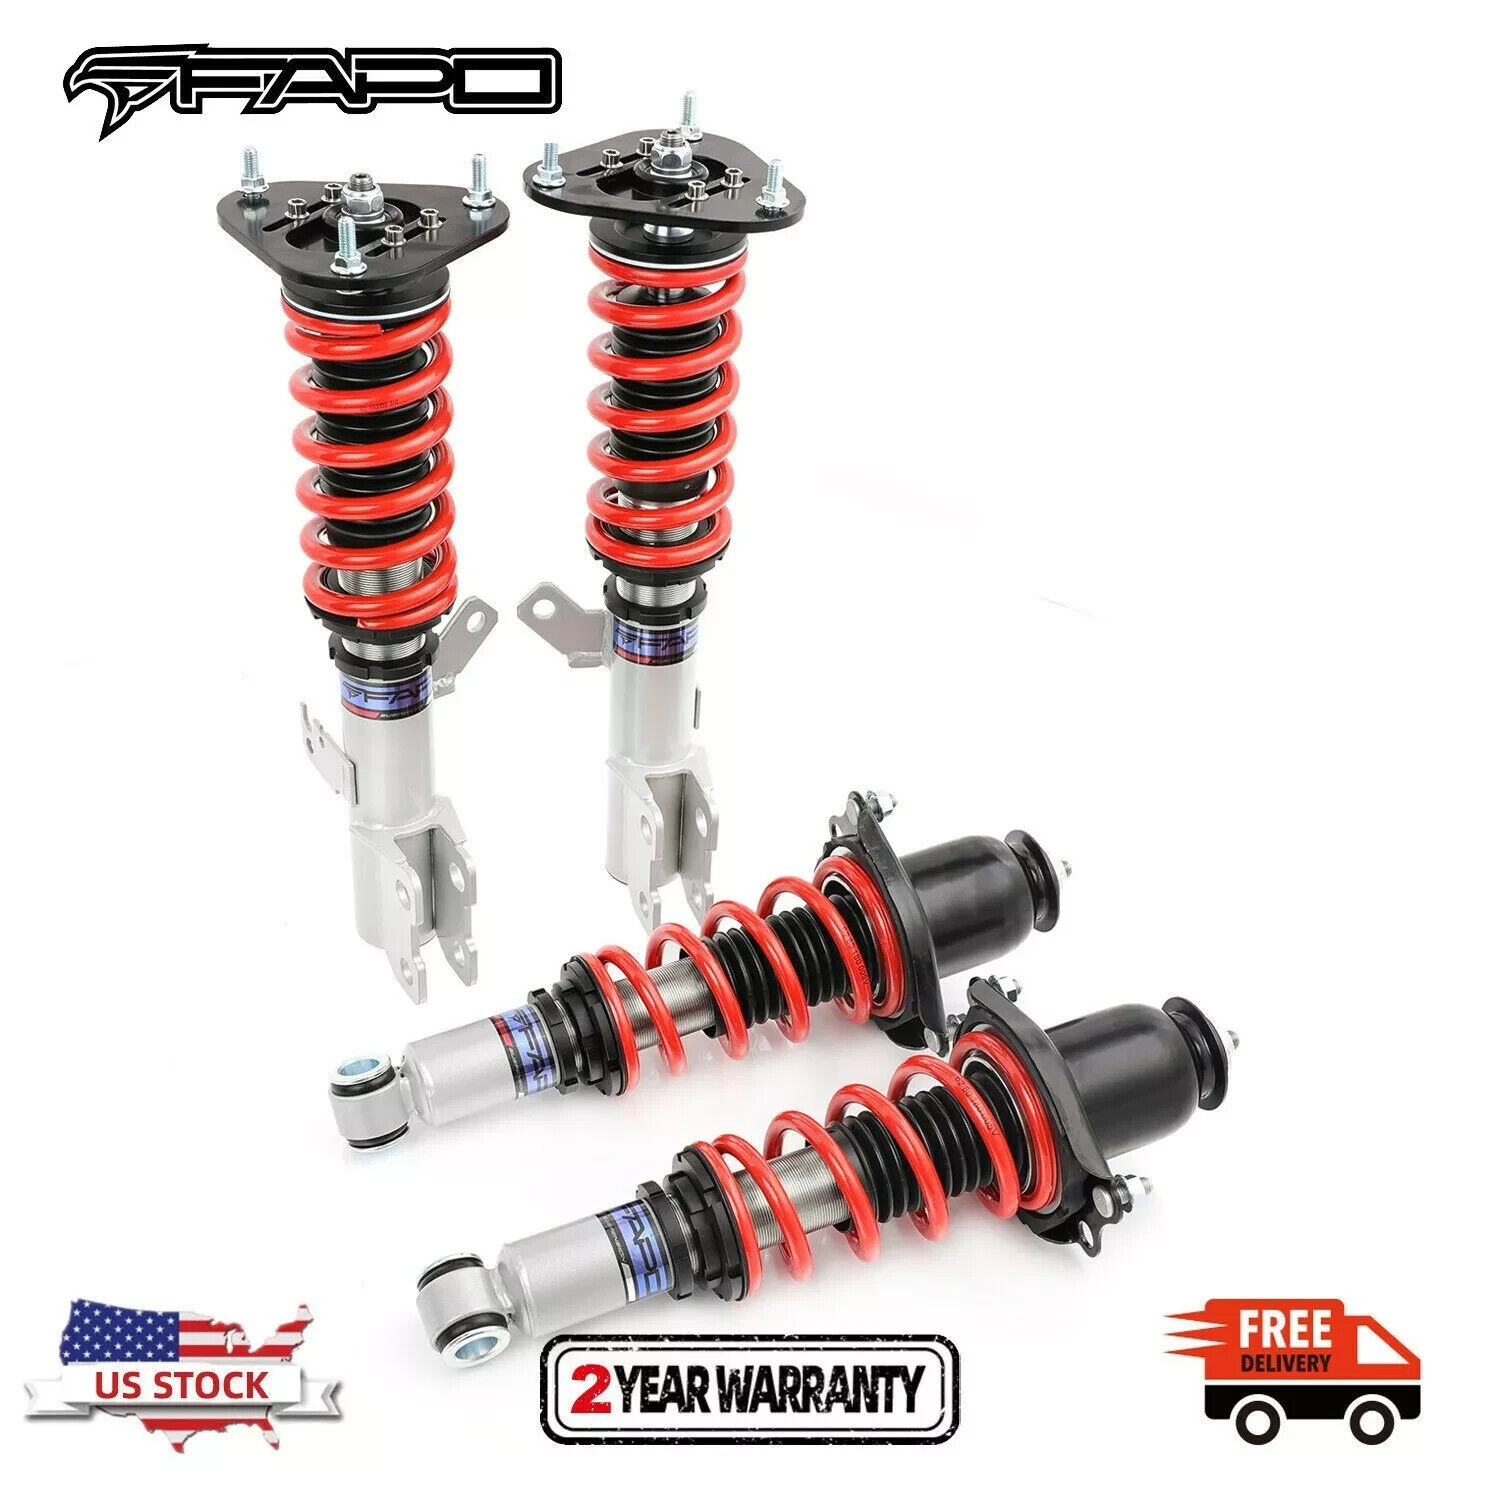 FAPO Coilovers Lowering Suspension kits for Toyota Corolla 2009-2018 Adj Height